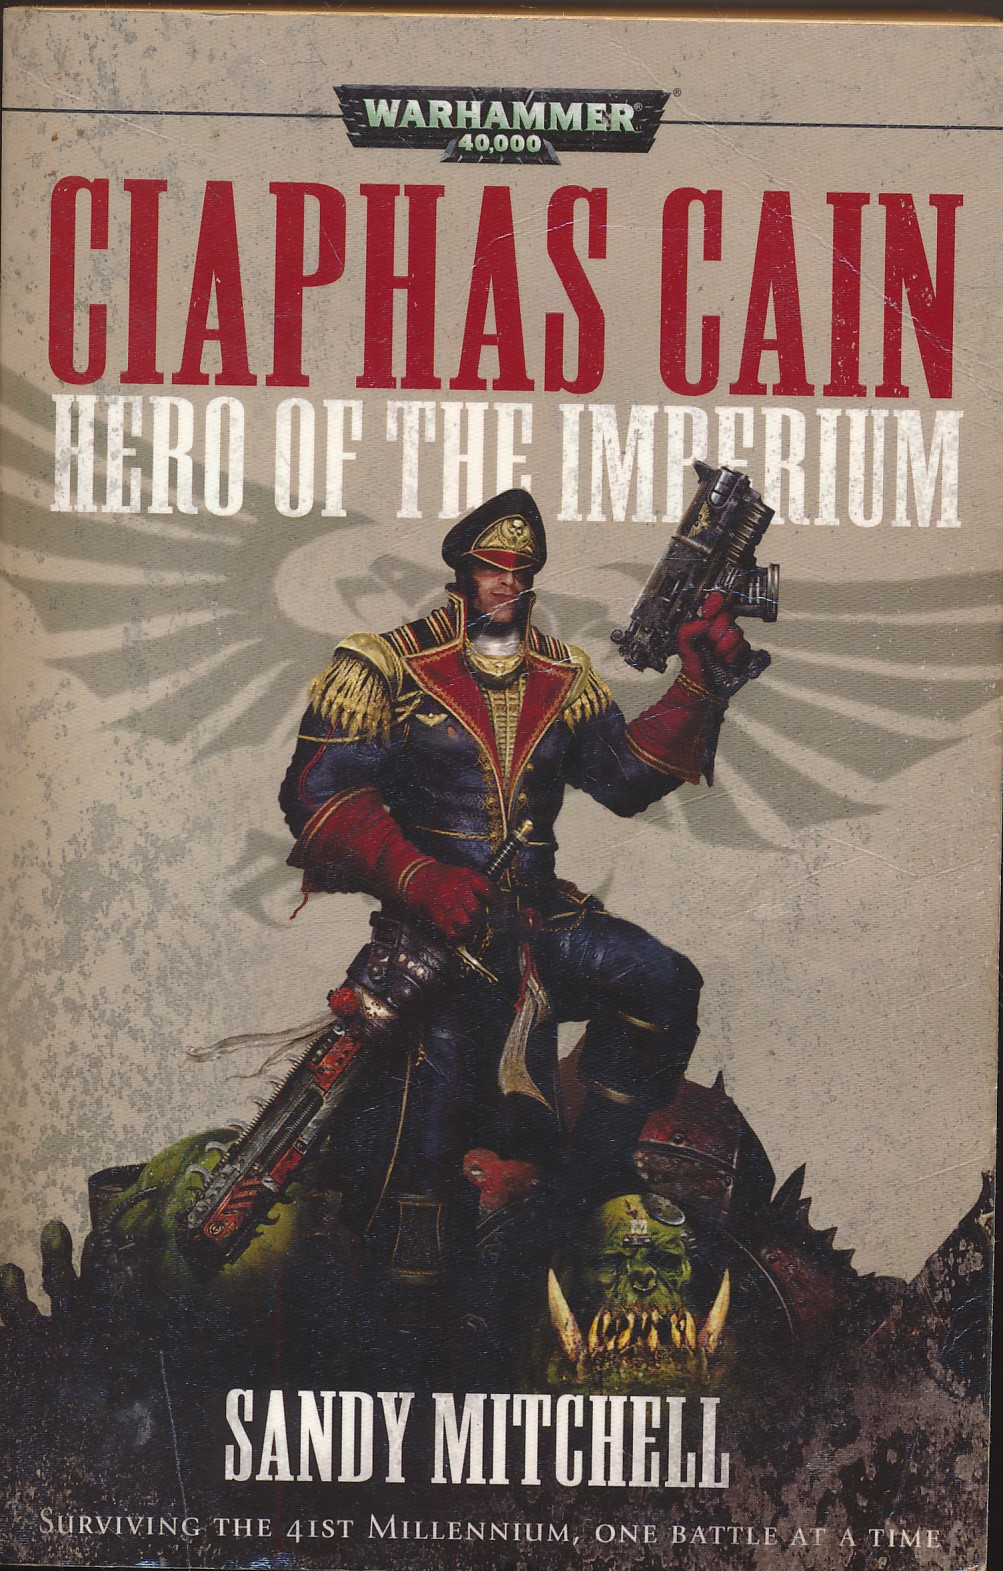 Warhammer 40,000. Ciaphas Cain. Hero of the Imperium. Omnibus Edition.